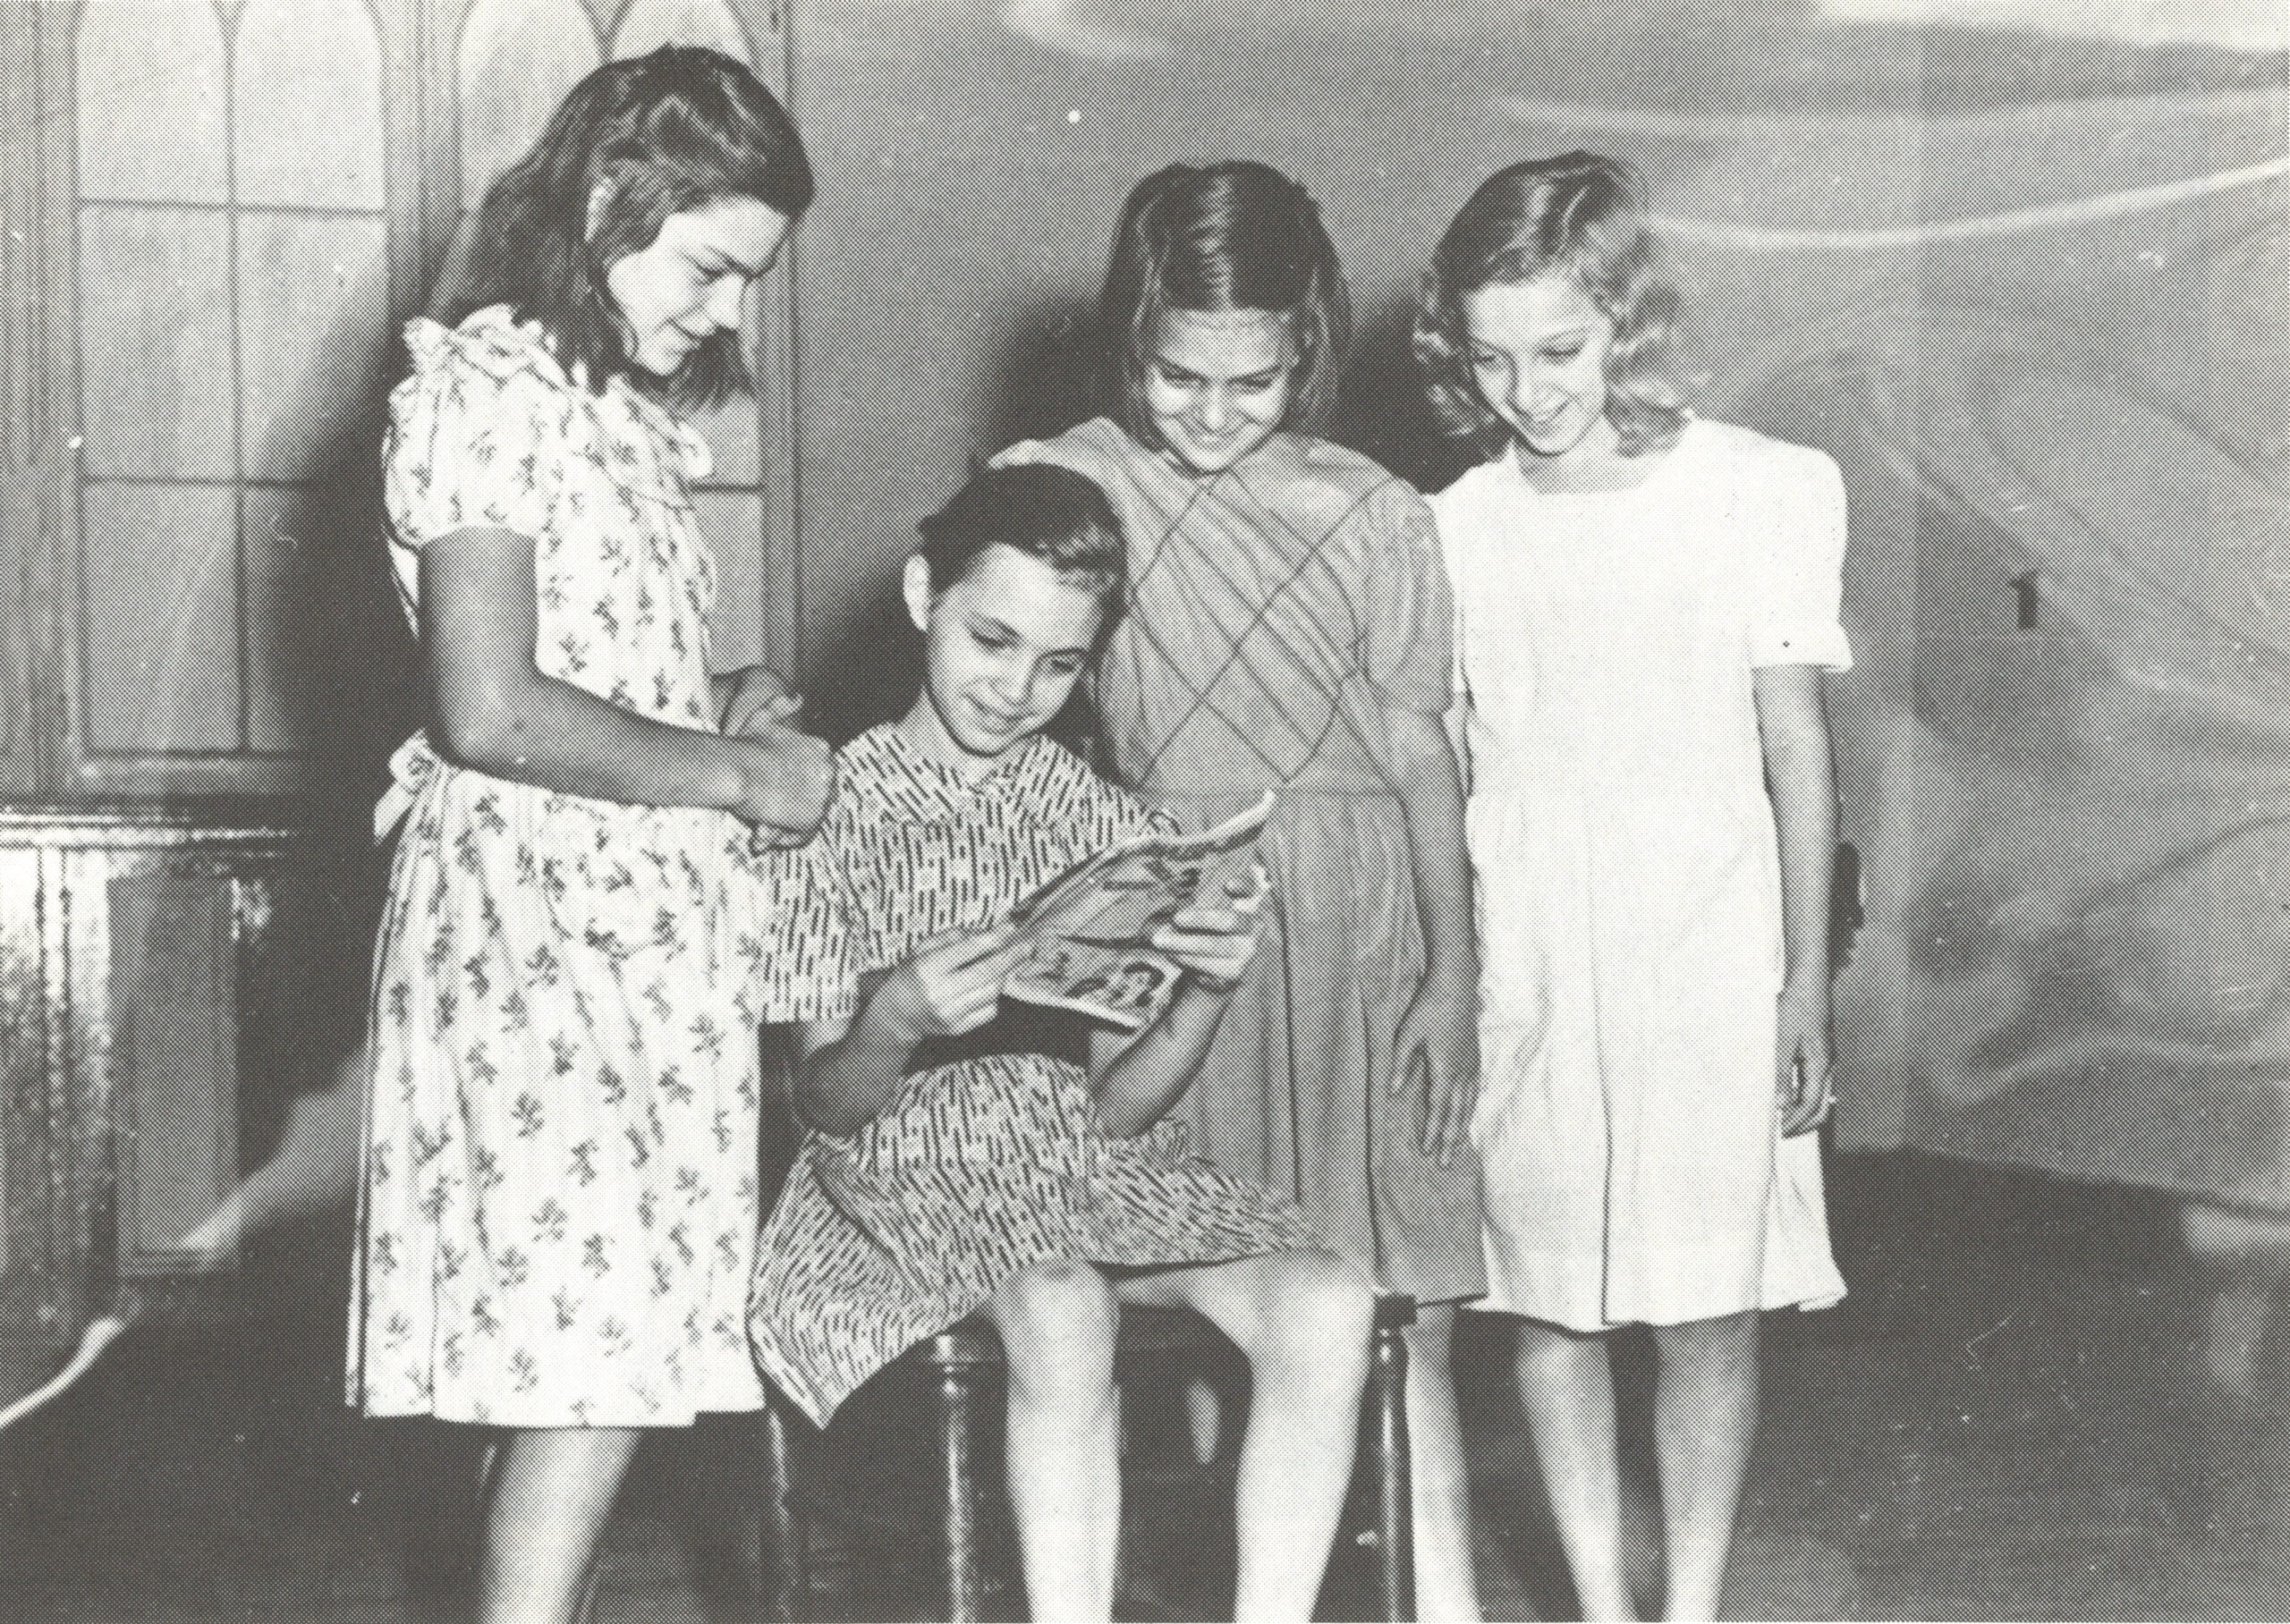 Old picture of younf girls standing and reading a book